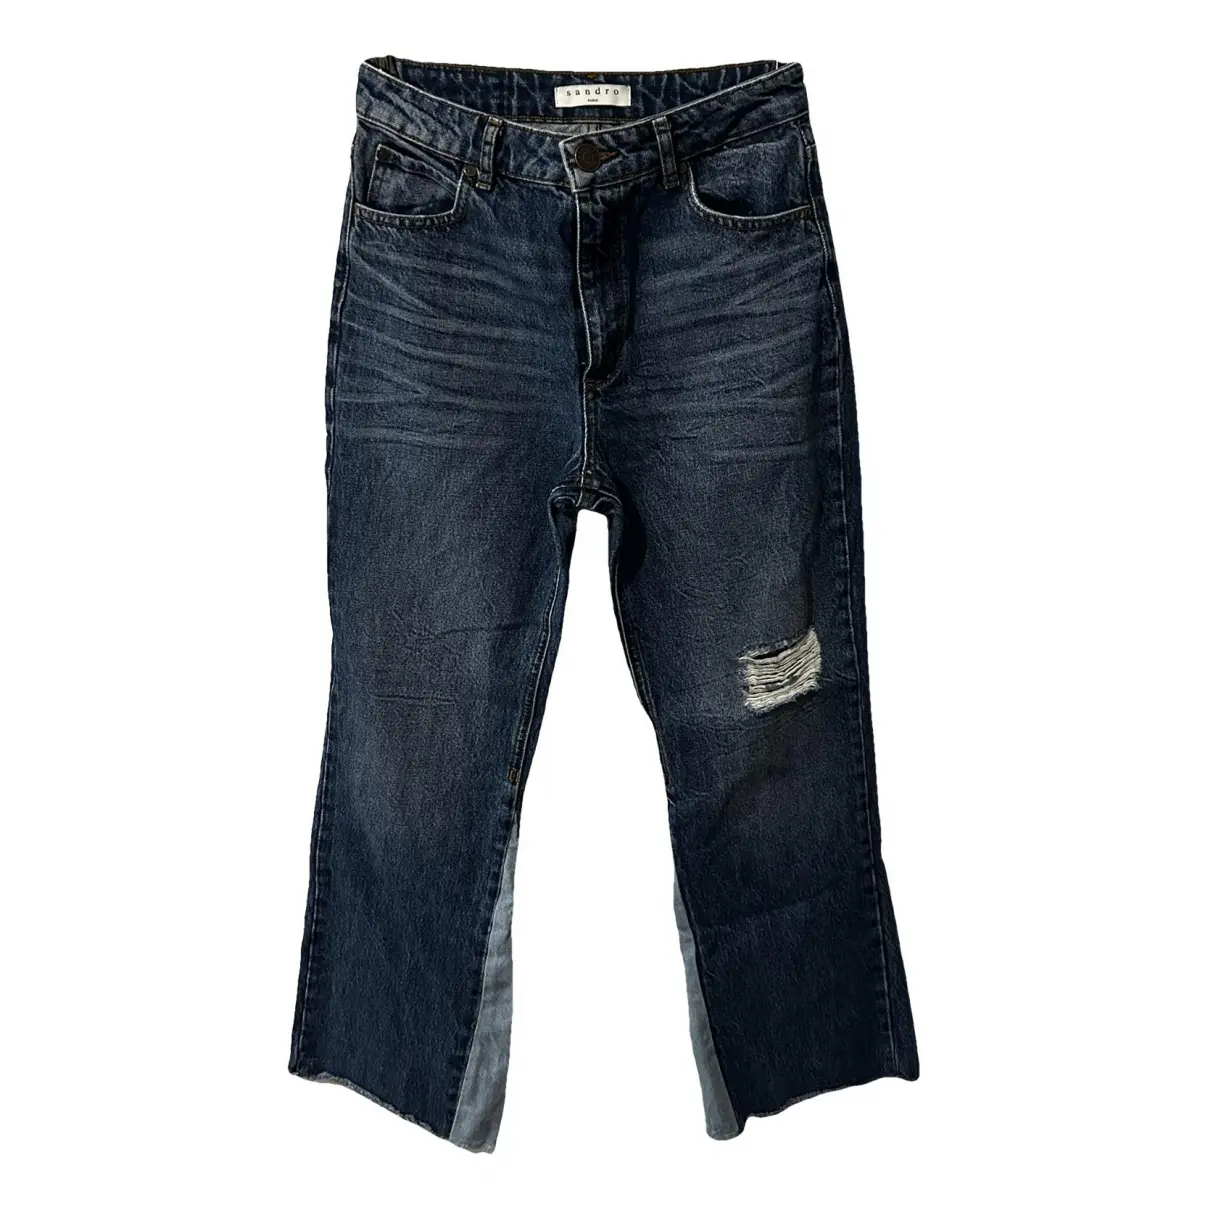 Fall Winter 2019 bootcut jeans